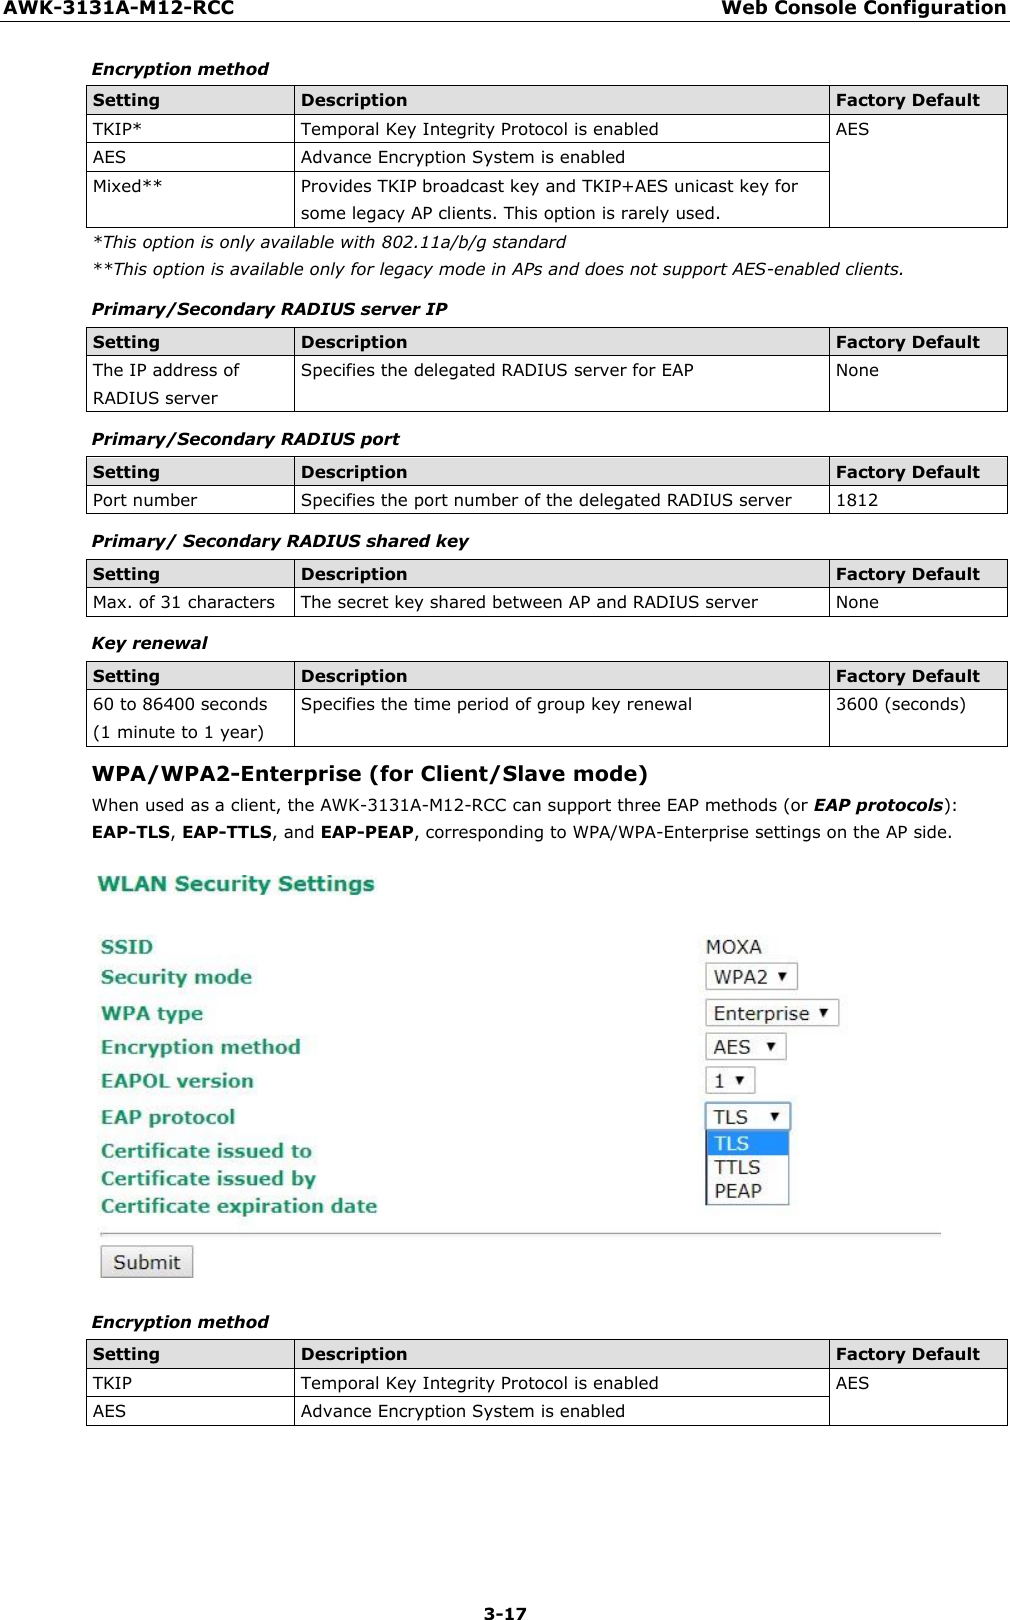 3-17 AWK-3131A-M12-RCC Web Console Configuration Encryption method      Setting Description Factory Default TKIP* Temporal Key Integrity Protocol is enabled AES AES Advance Encryption System is enabled Mixed** Provides TKIP broadcast key and TKIP+AES unicast key for some legacy AP clients. This option is rarely used. *This option is only available with 802.11a/b/g standard **This option is available only for legacy mode in APs and does not support AES-enabled clients.  Primary/Secondary RADIUS server IP  Setting Description Factory Default The IP address of RADIUS server Specifies the delegated RADIUS server for EAP None Primary/Secondary RADIUS port  Setting Description Factory Default Port number Specifies the port number of the delegated RADIUS server 1812 Primary/ Secondary RADIUS shared key  Setting Description Factory Default Max. of 31 characters The secret key shared between AP and RADIUS server None Key renewal  Setting Description Factory Default 60 to 86400 seconds (1 minute to 1 year) Specifies the time period of group key renewal 3600 (seconds) WPA/WPA2-Enterprise (for Client/Slave mode) When used as a client, the AWK-3131A-M12-RCC can support three EAP methods (or EAP protocols): EAP-TLS, EAP-TTLS, and EAP-PEAP, corresponding to WPA/WPA-Enterprise settings on the AP side.   Encryption method  Setting Description Factory Default TKIP Temporal Key Integrity Protocol is enabled AES AES Advance Encryption System is enabled 